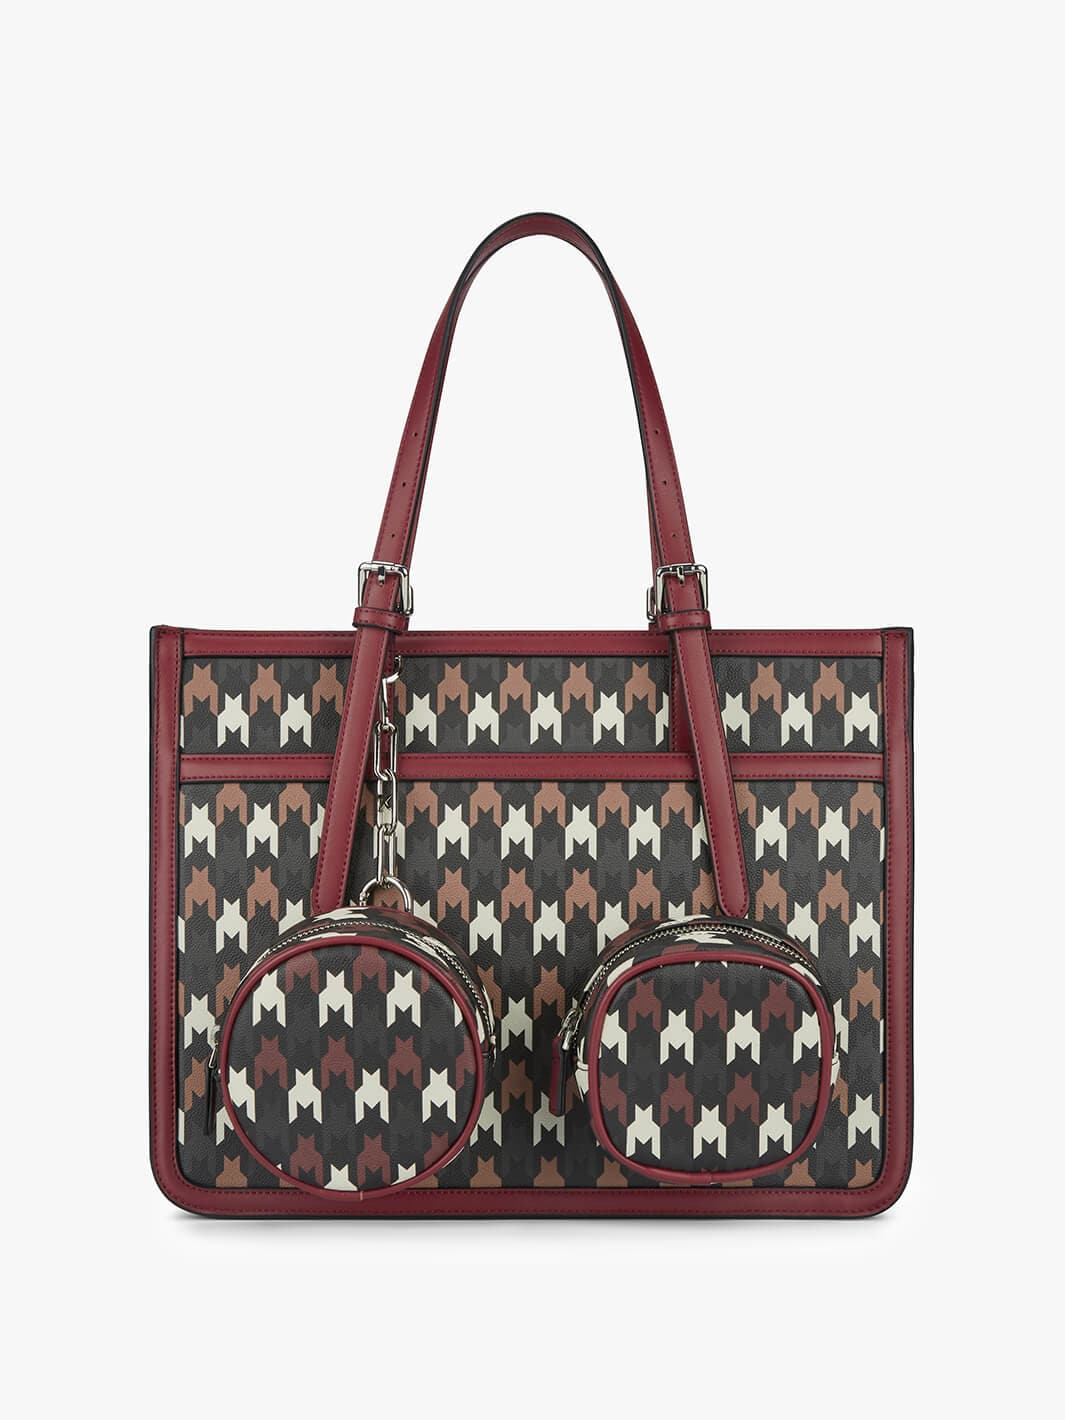 Louis Vuitton Selene purse - clothing & accessories - by owner